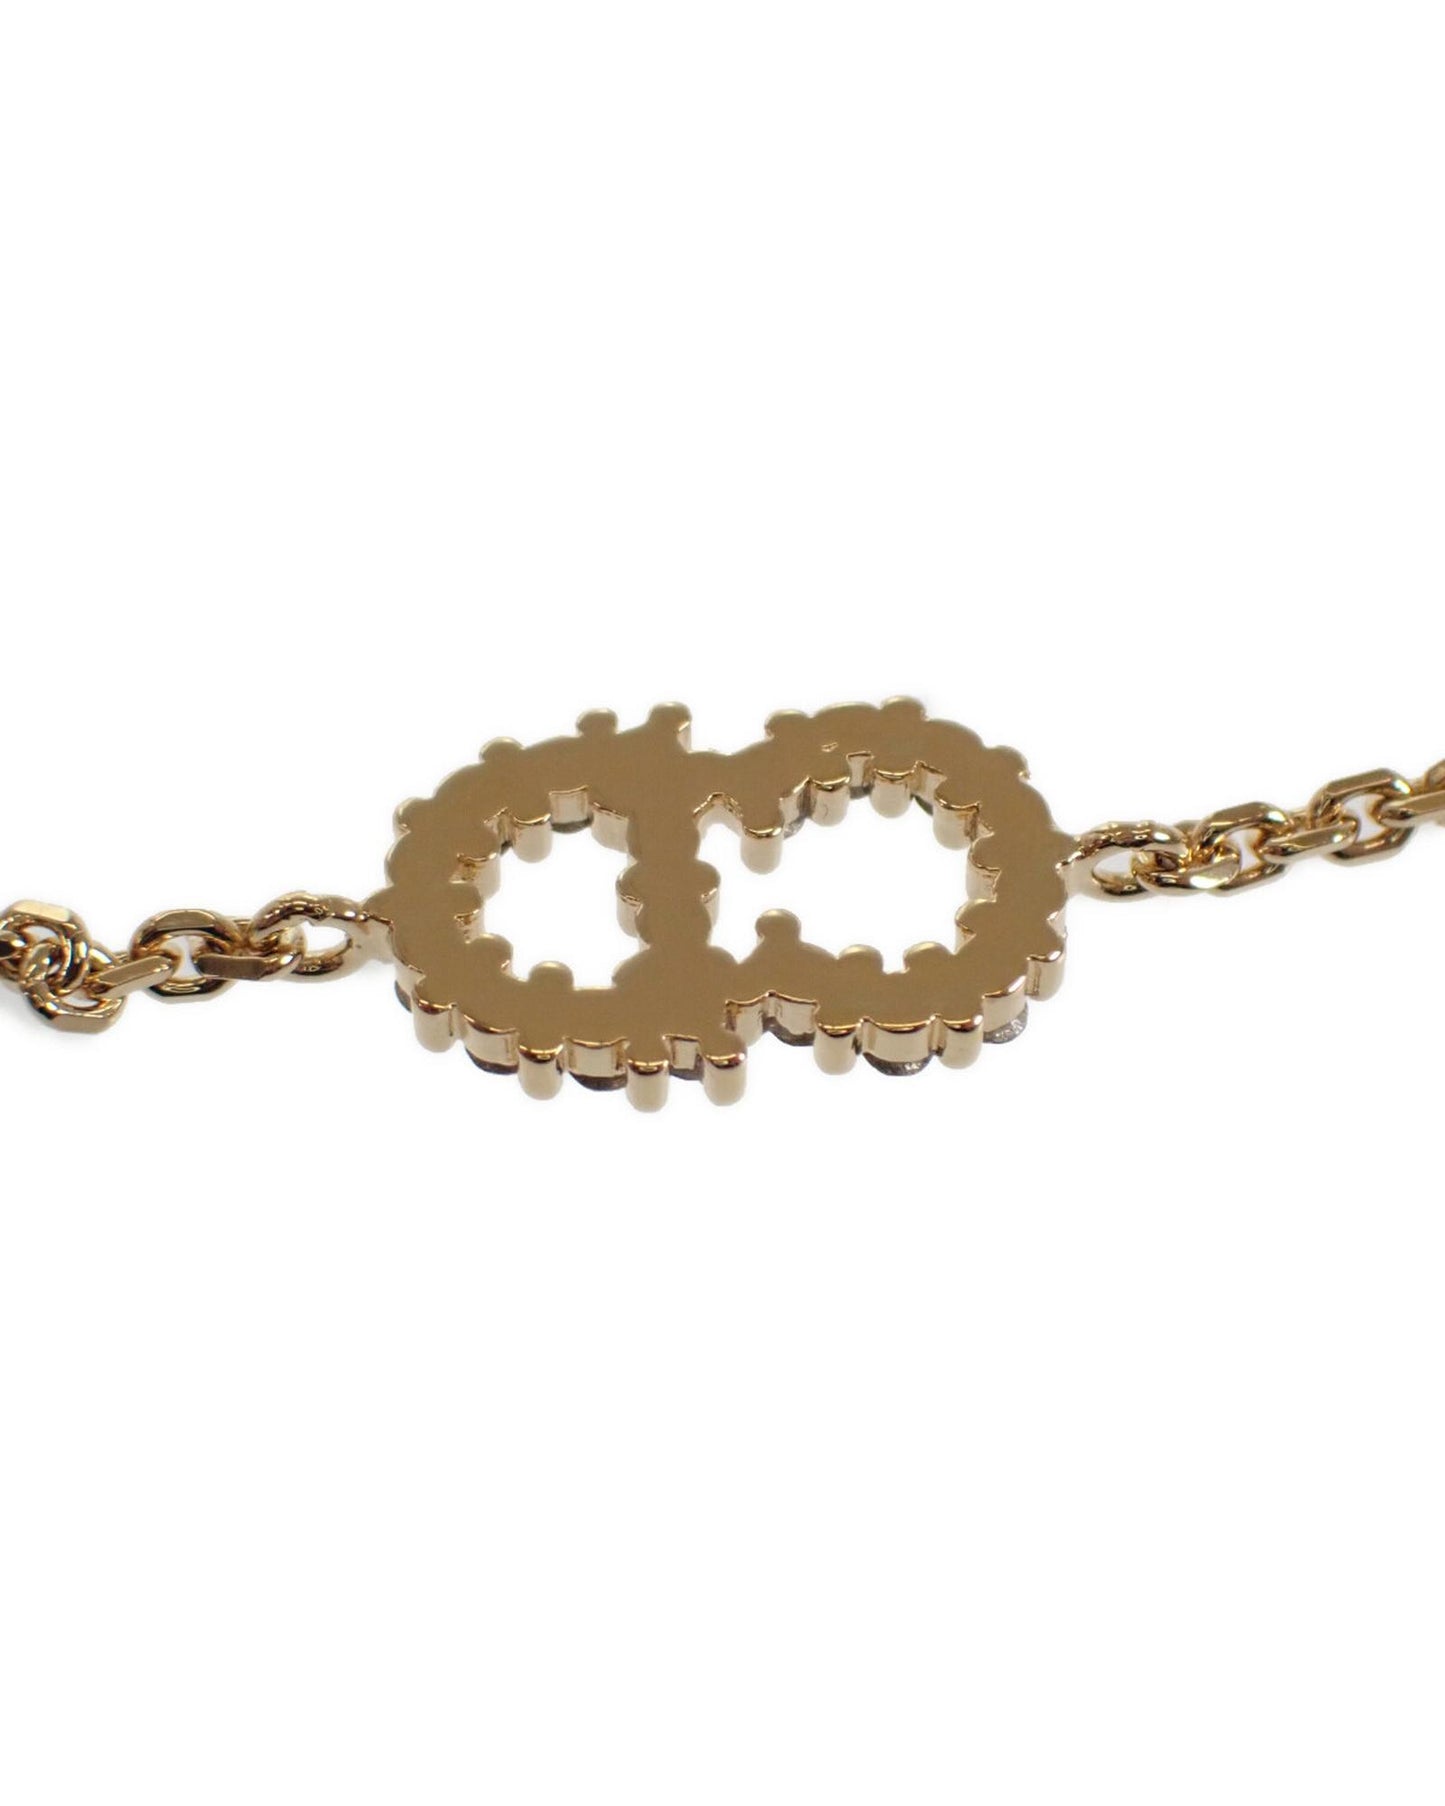 Dior Women's Gold Moon Bracelet - Excellent Condition in Gold